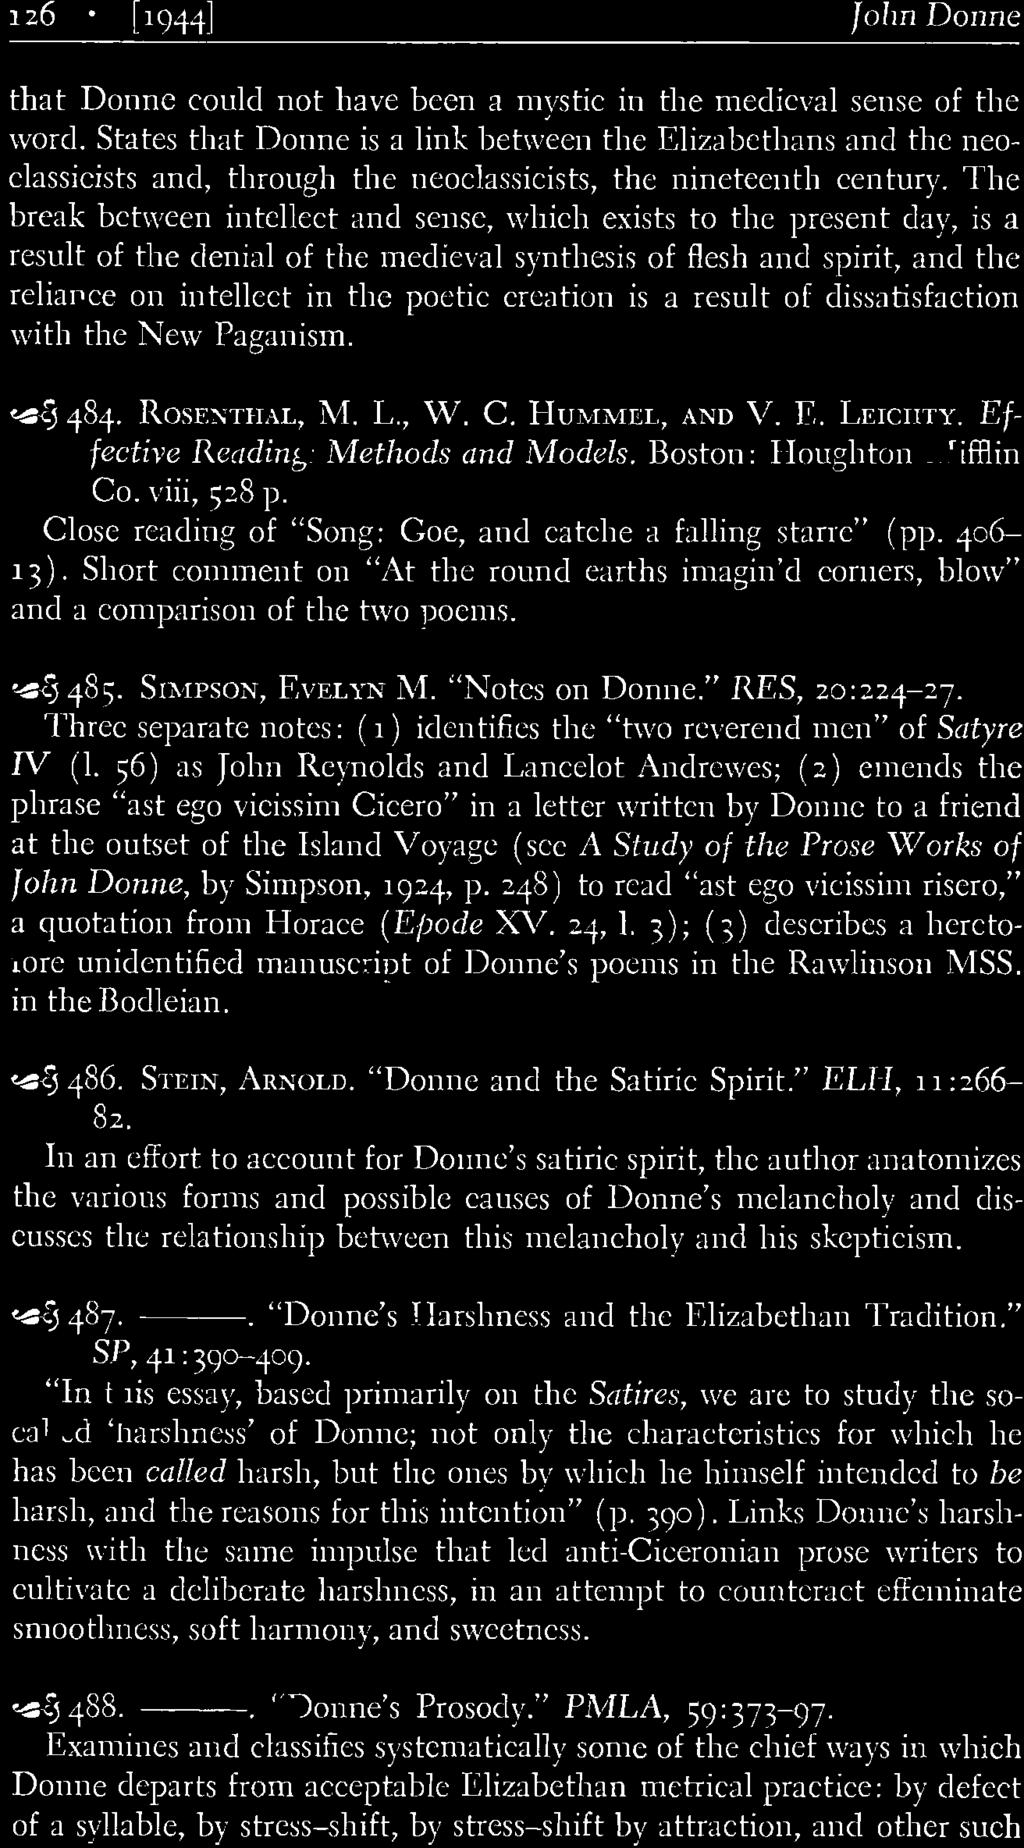 Close reading of "Song: Coe, and catche a falling starre" (pp. 406-13). Short comment on "At the round earths imagin'd corners, blow" v and a comparison of the two poems. ~ 485. SIMPSON, EVELYN M.